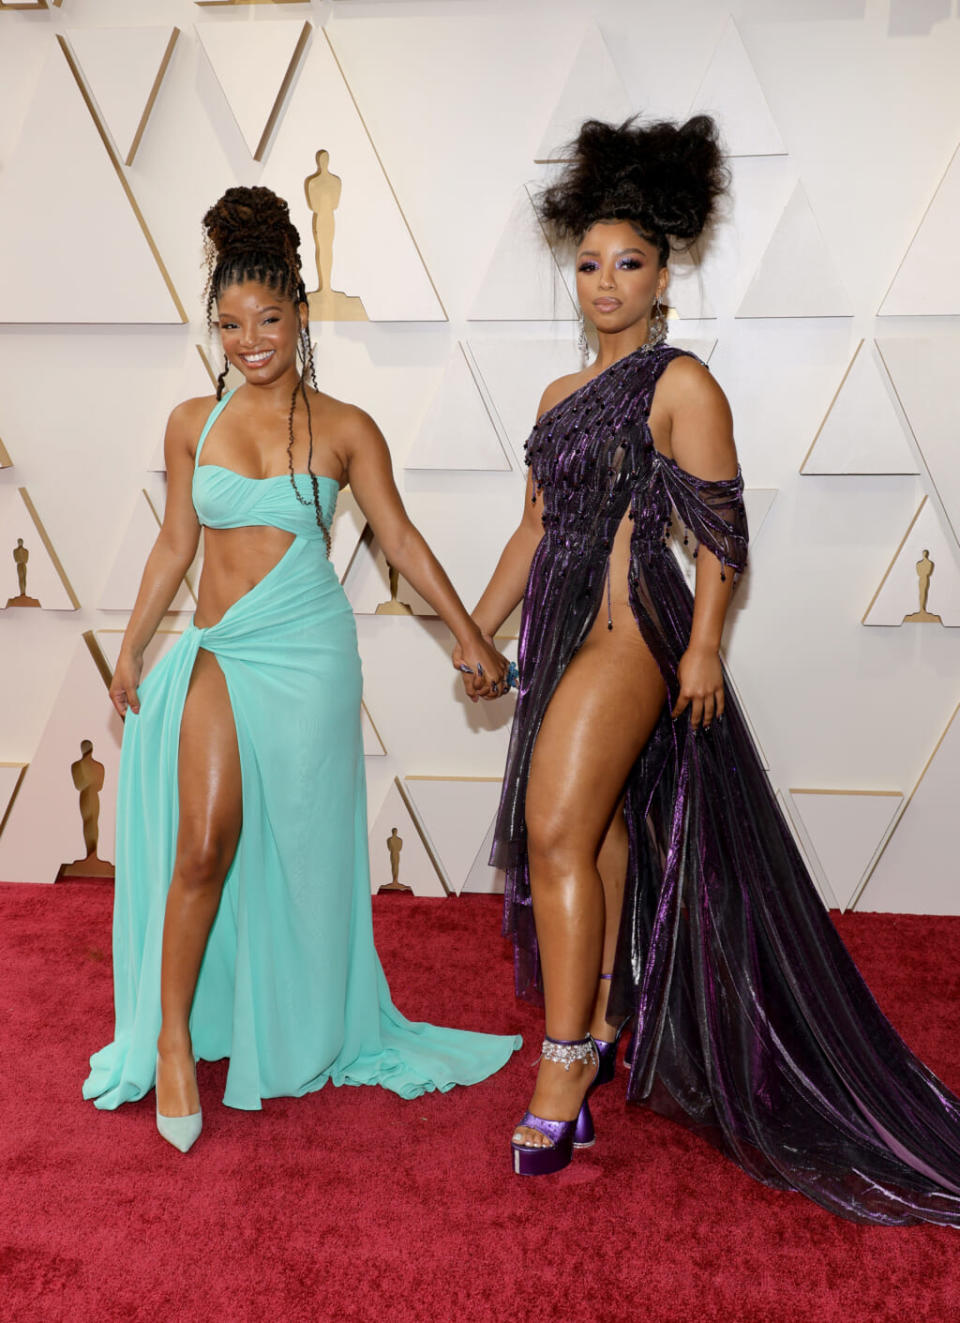 HOLLYWOOD, CALIFORNIA – MARCH 27: (L-R) Halle Bailey and Chloe Bailey attend the 94th Annual Academy Awards at Hollywood and Highland on March 27, 2022 in Hollywood, California. (Photo by Mike Coppola/Getty Images)